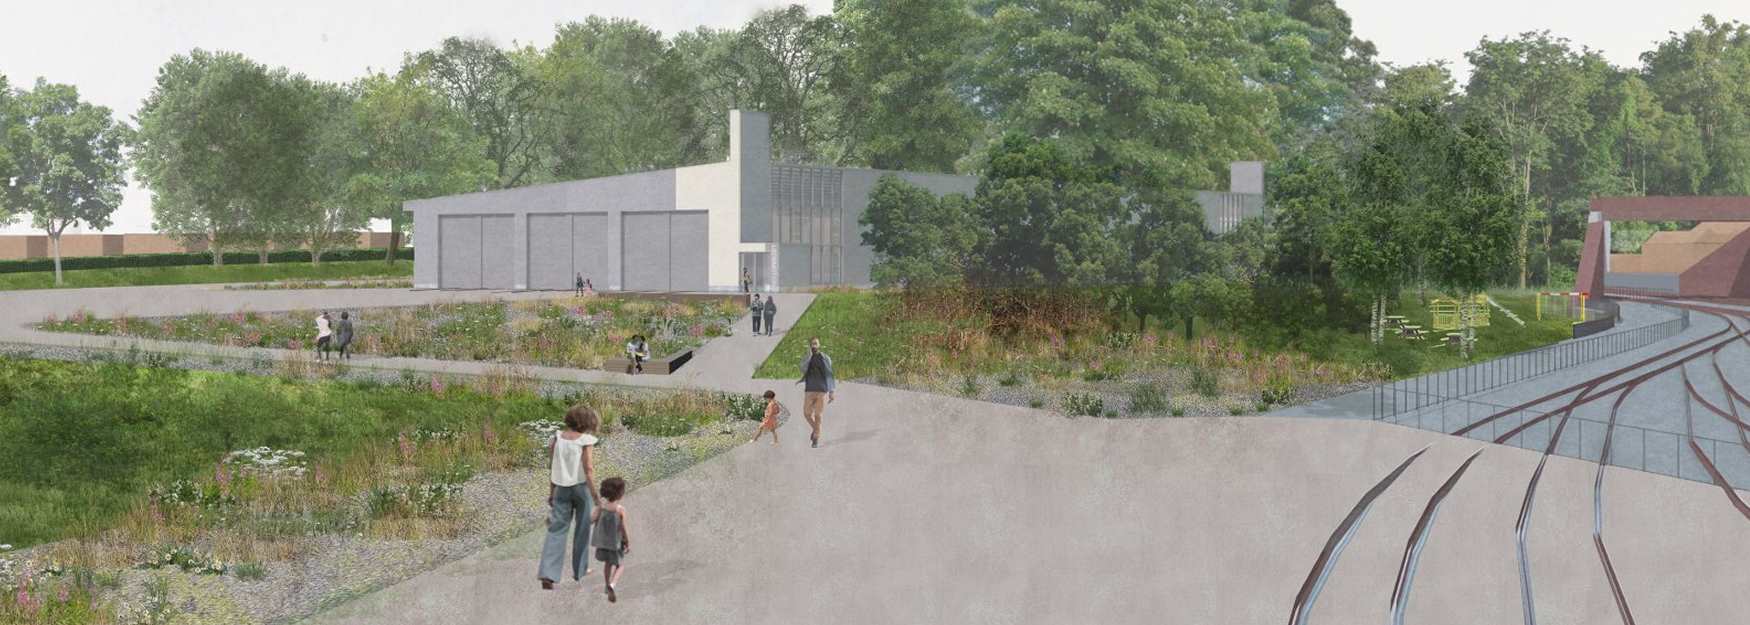 An illustration of what the new hall at Locomotion will look like